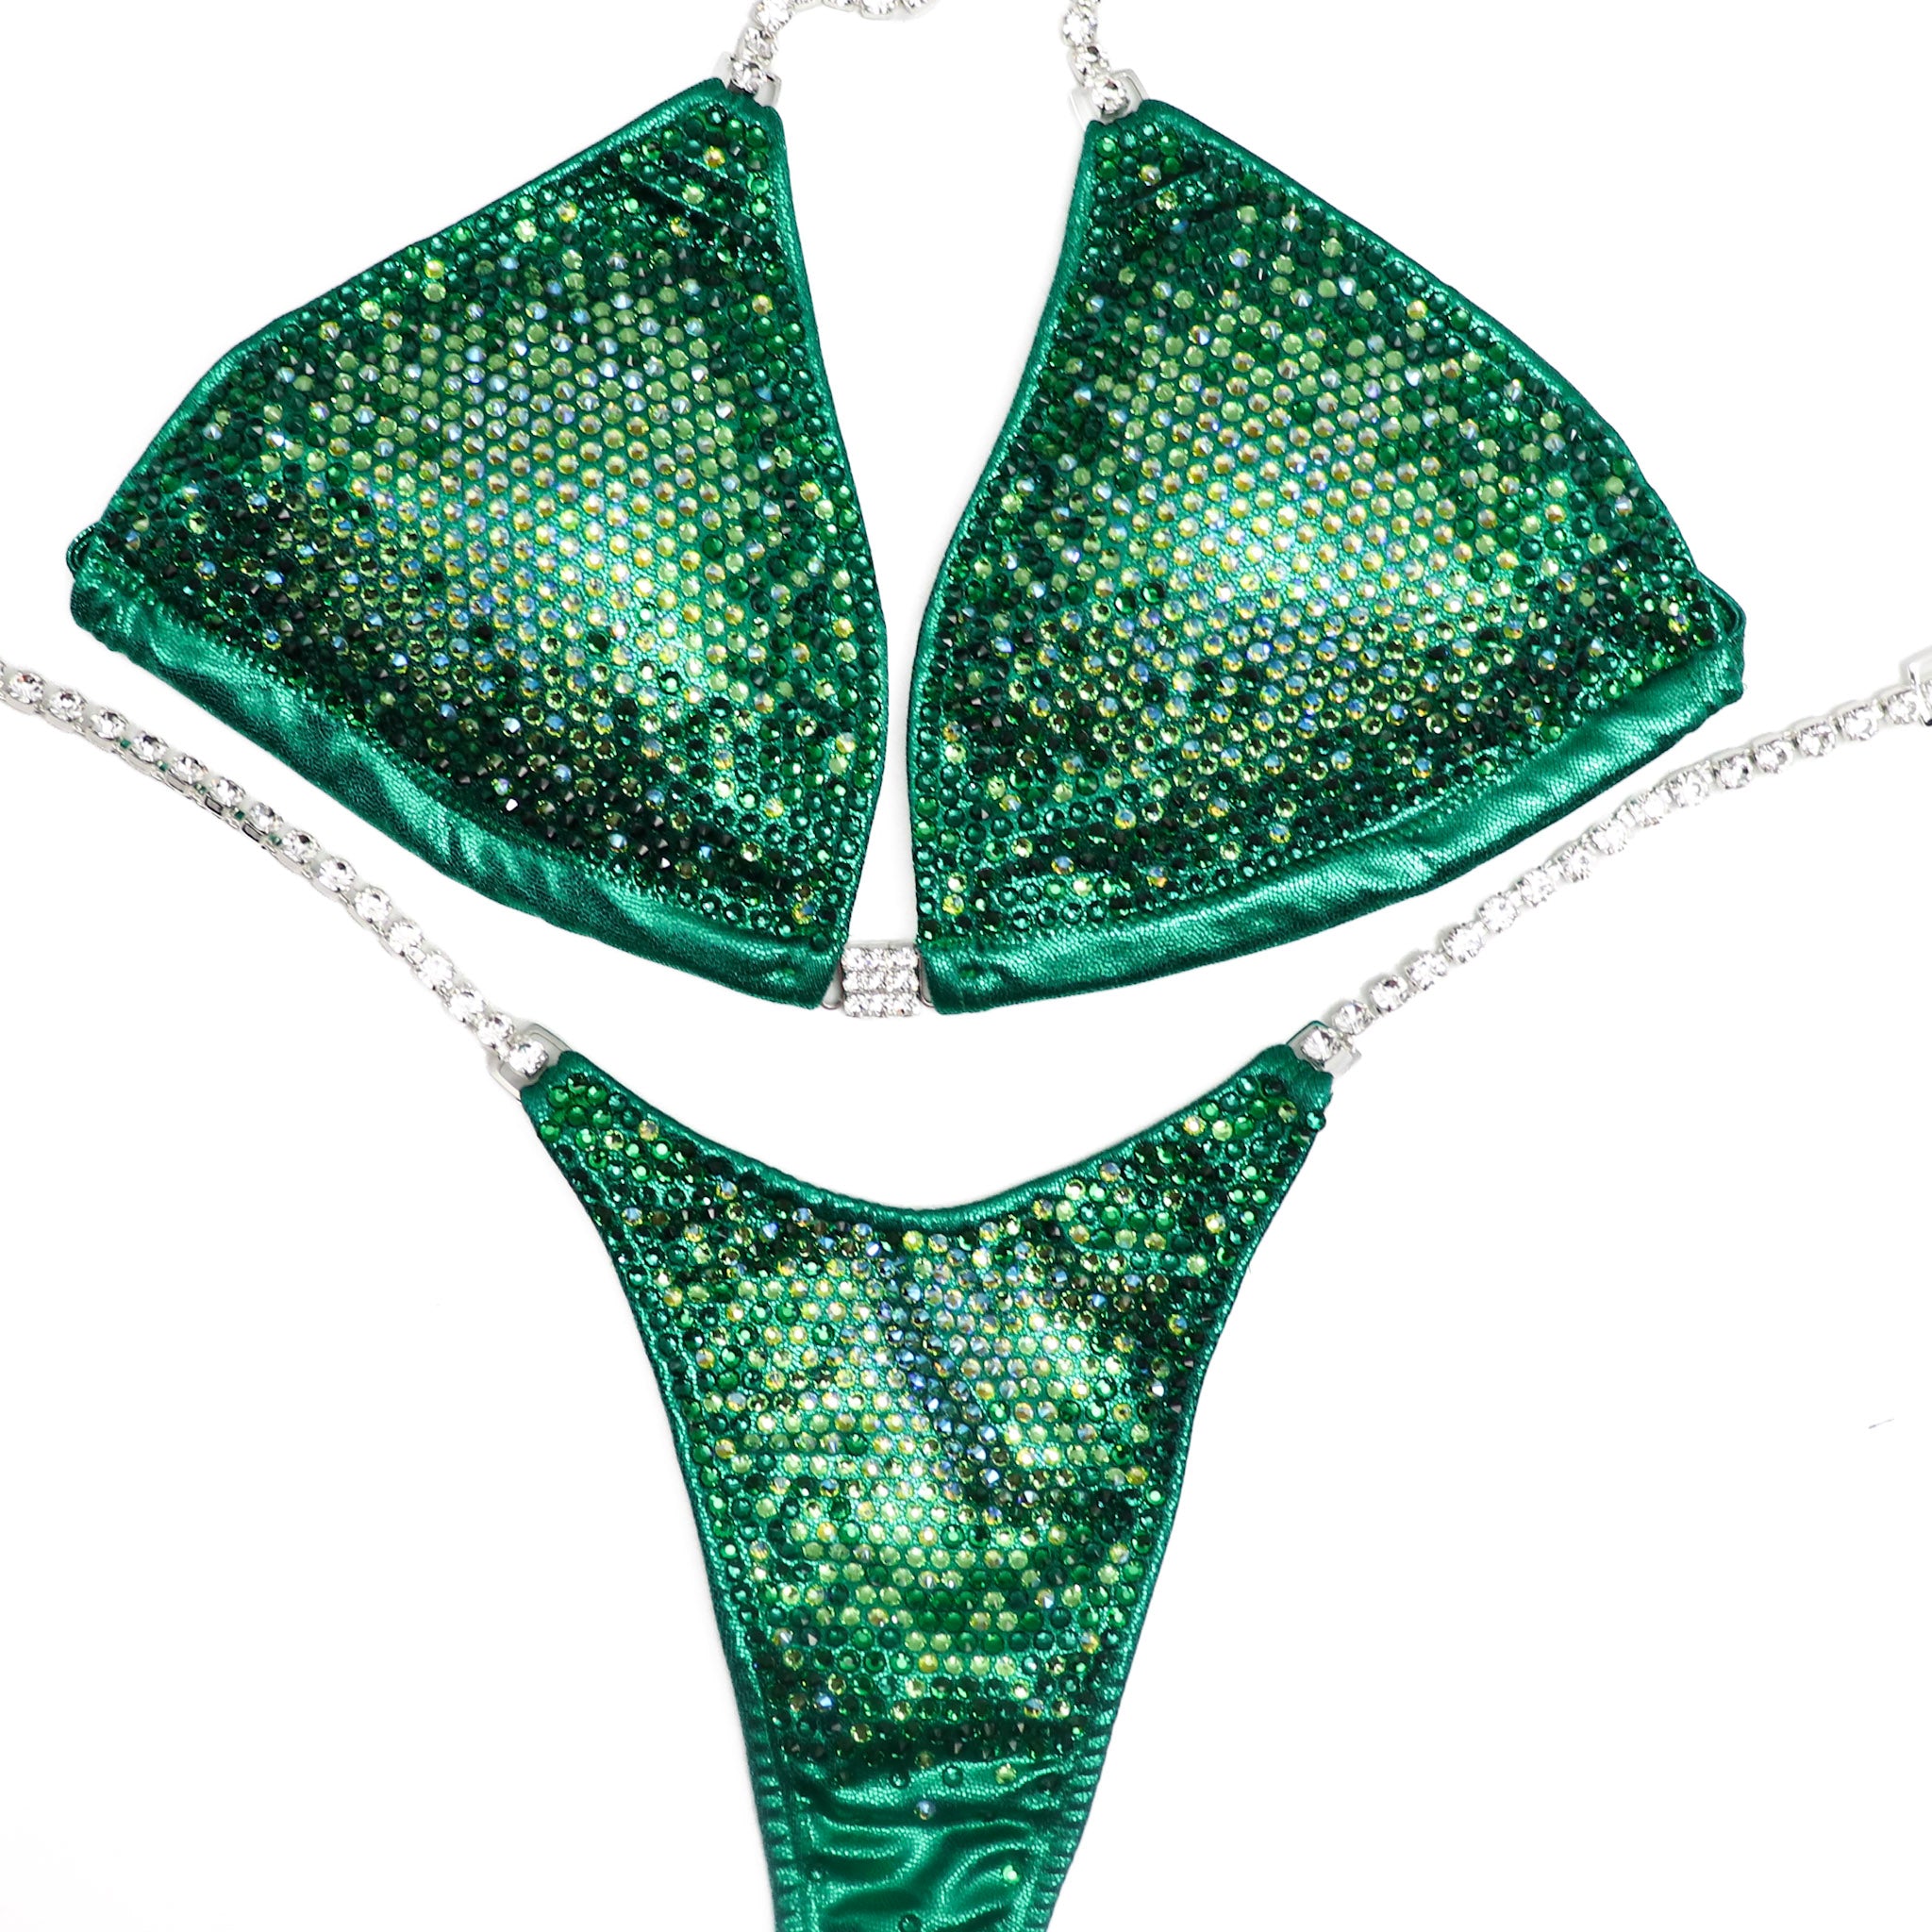 Ashley Kaltwasser's Electric Kale Nova Competition Suit for NPC Bikini Competitors in striking green. Elevate your stage presence with this electrifying design. Stand out and dominate with confidence. Shine bright as a champion in this exclusive suit.